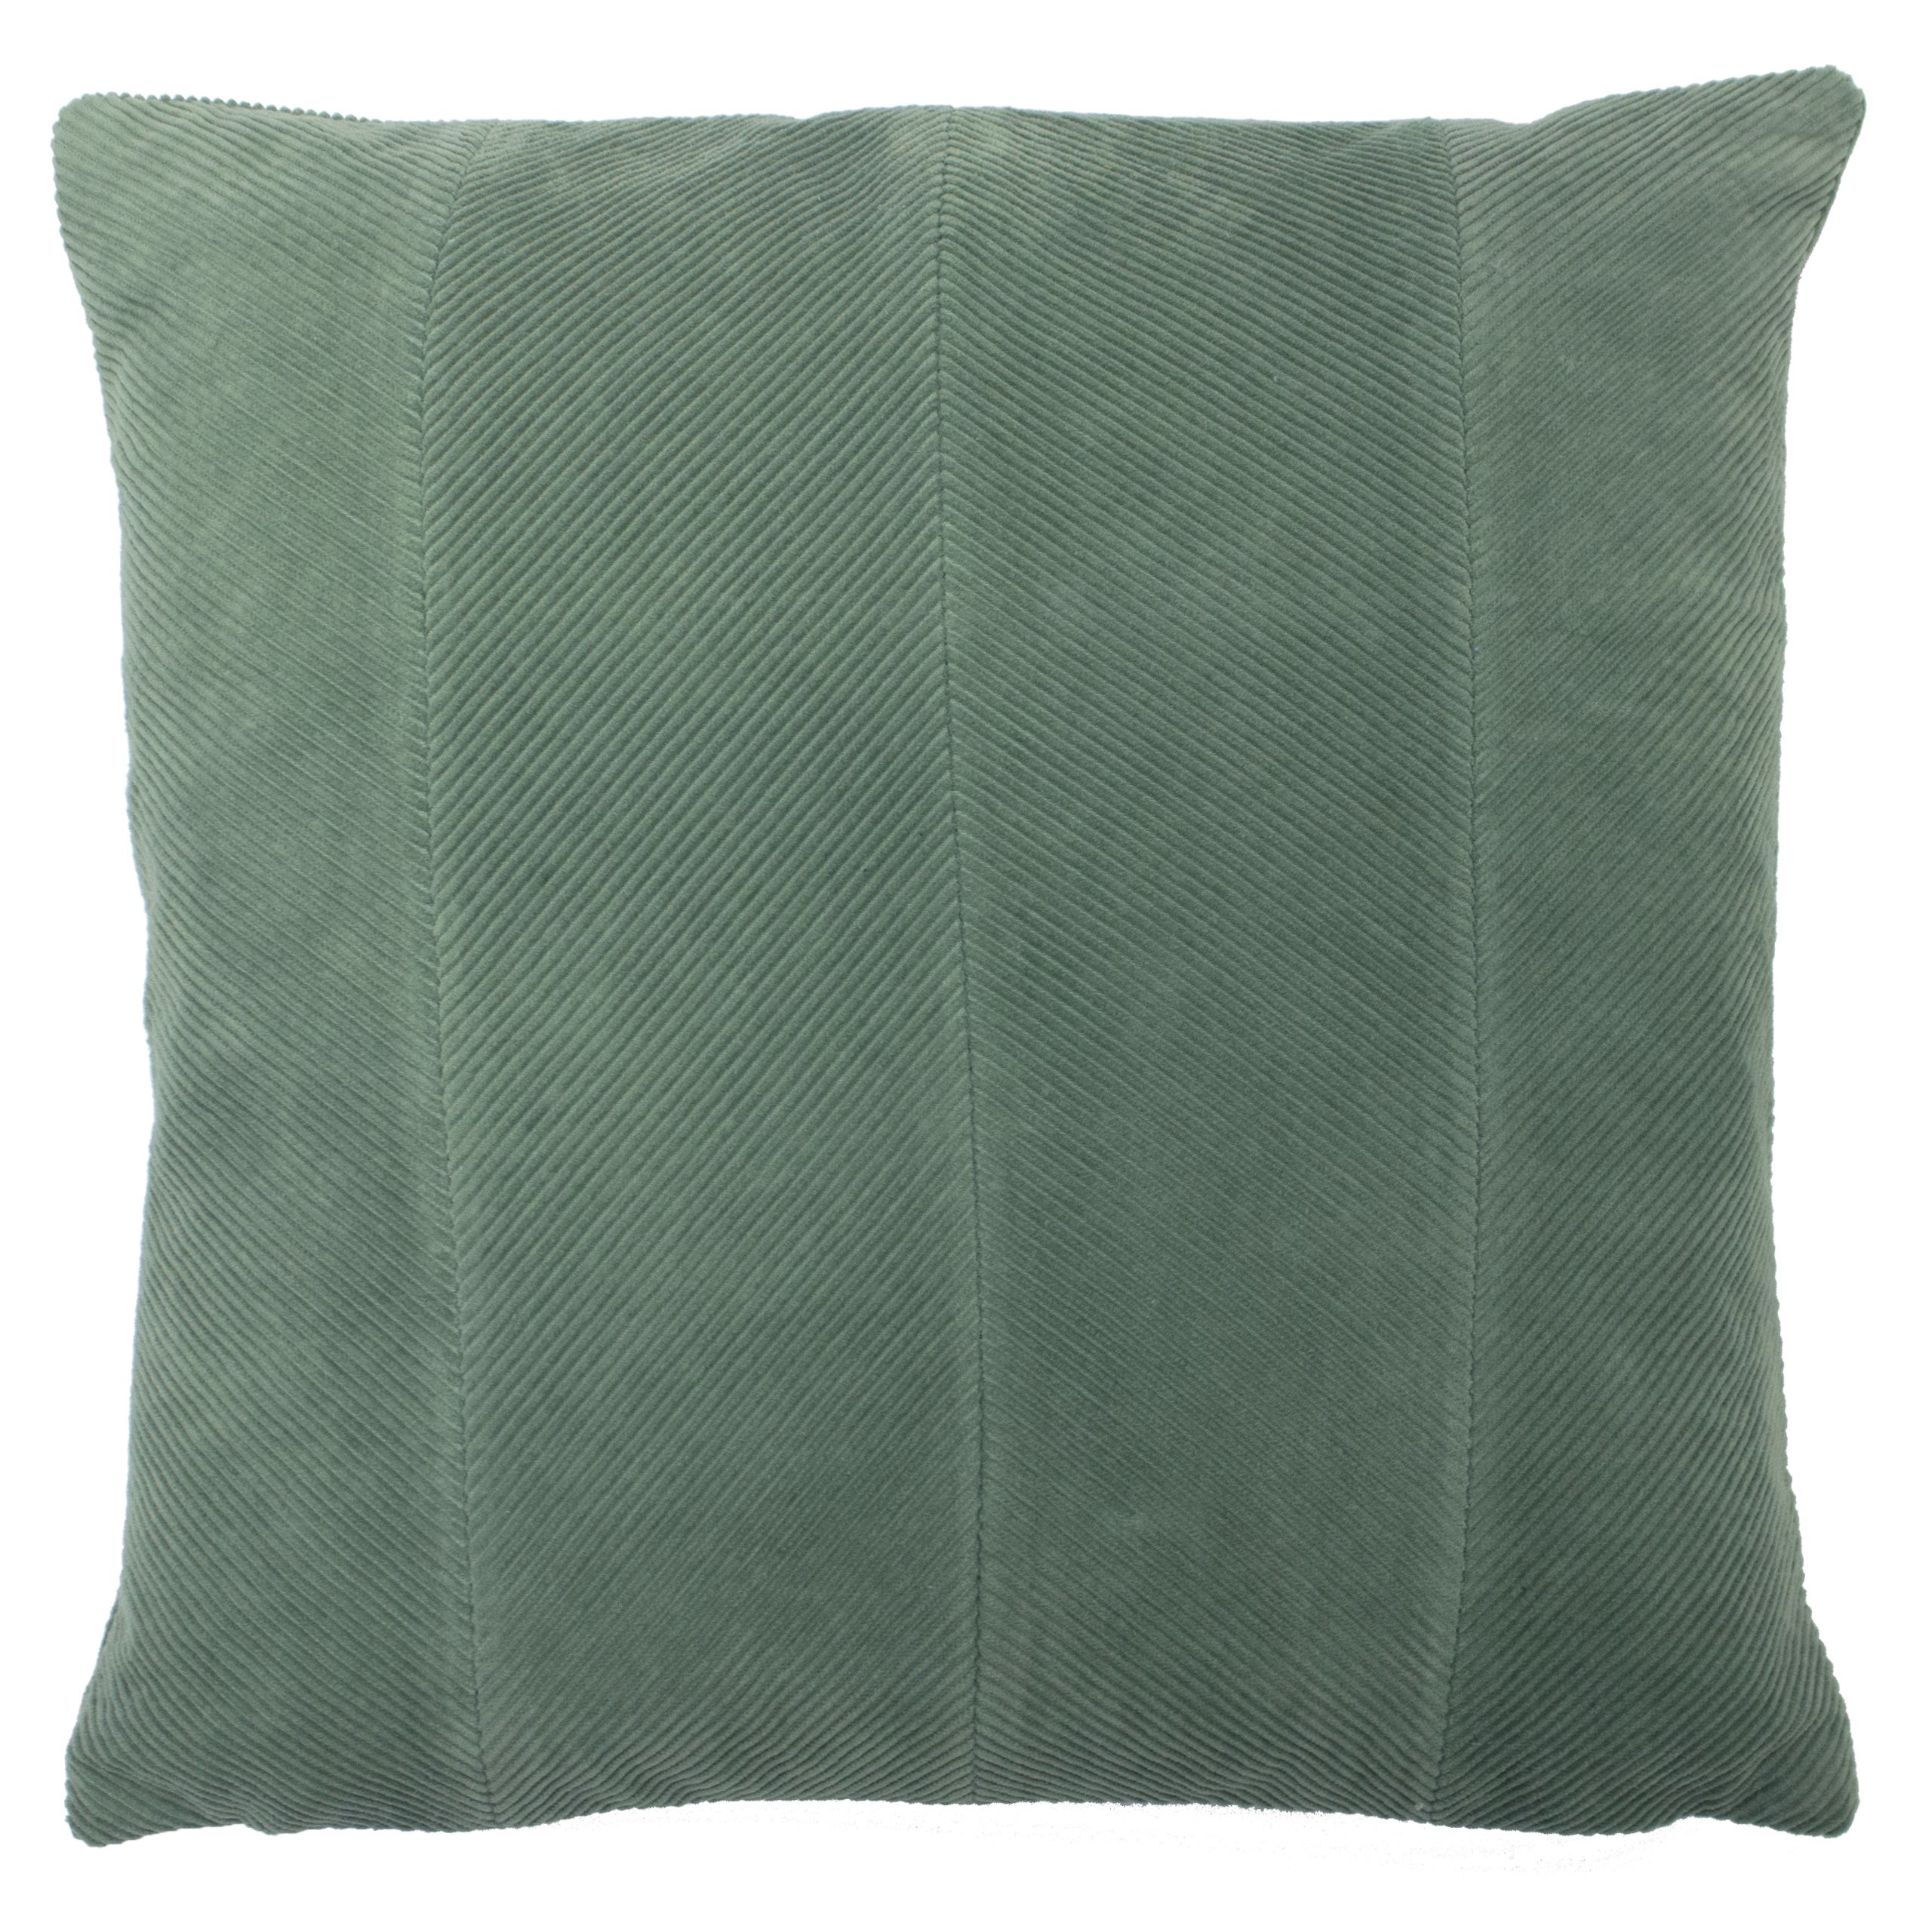 Do you love corduroy and its versatile and robust characteristics? Why not add this diverse geometric cushion to your décor, which features contrasting directional corduroy fabric panels to make a textural geometric pattern on the cushion front. The soft colour palette allows the cushions to speak for themselves - alongside the textured surface, to stand out against any interior.